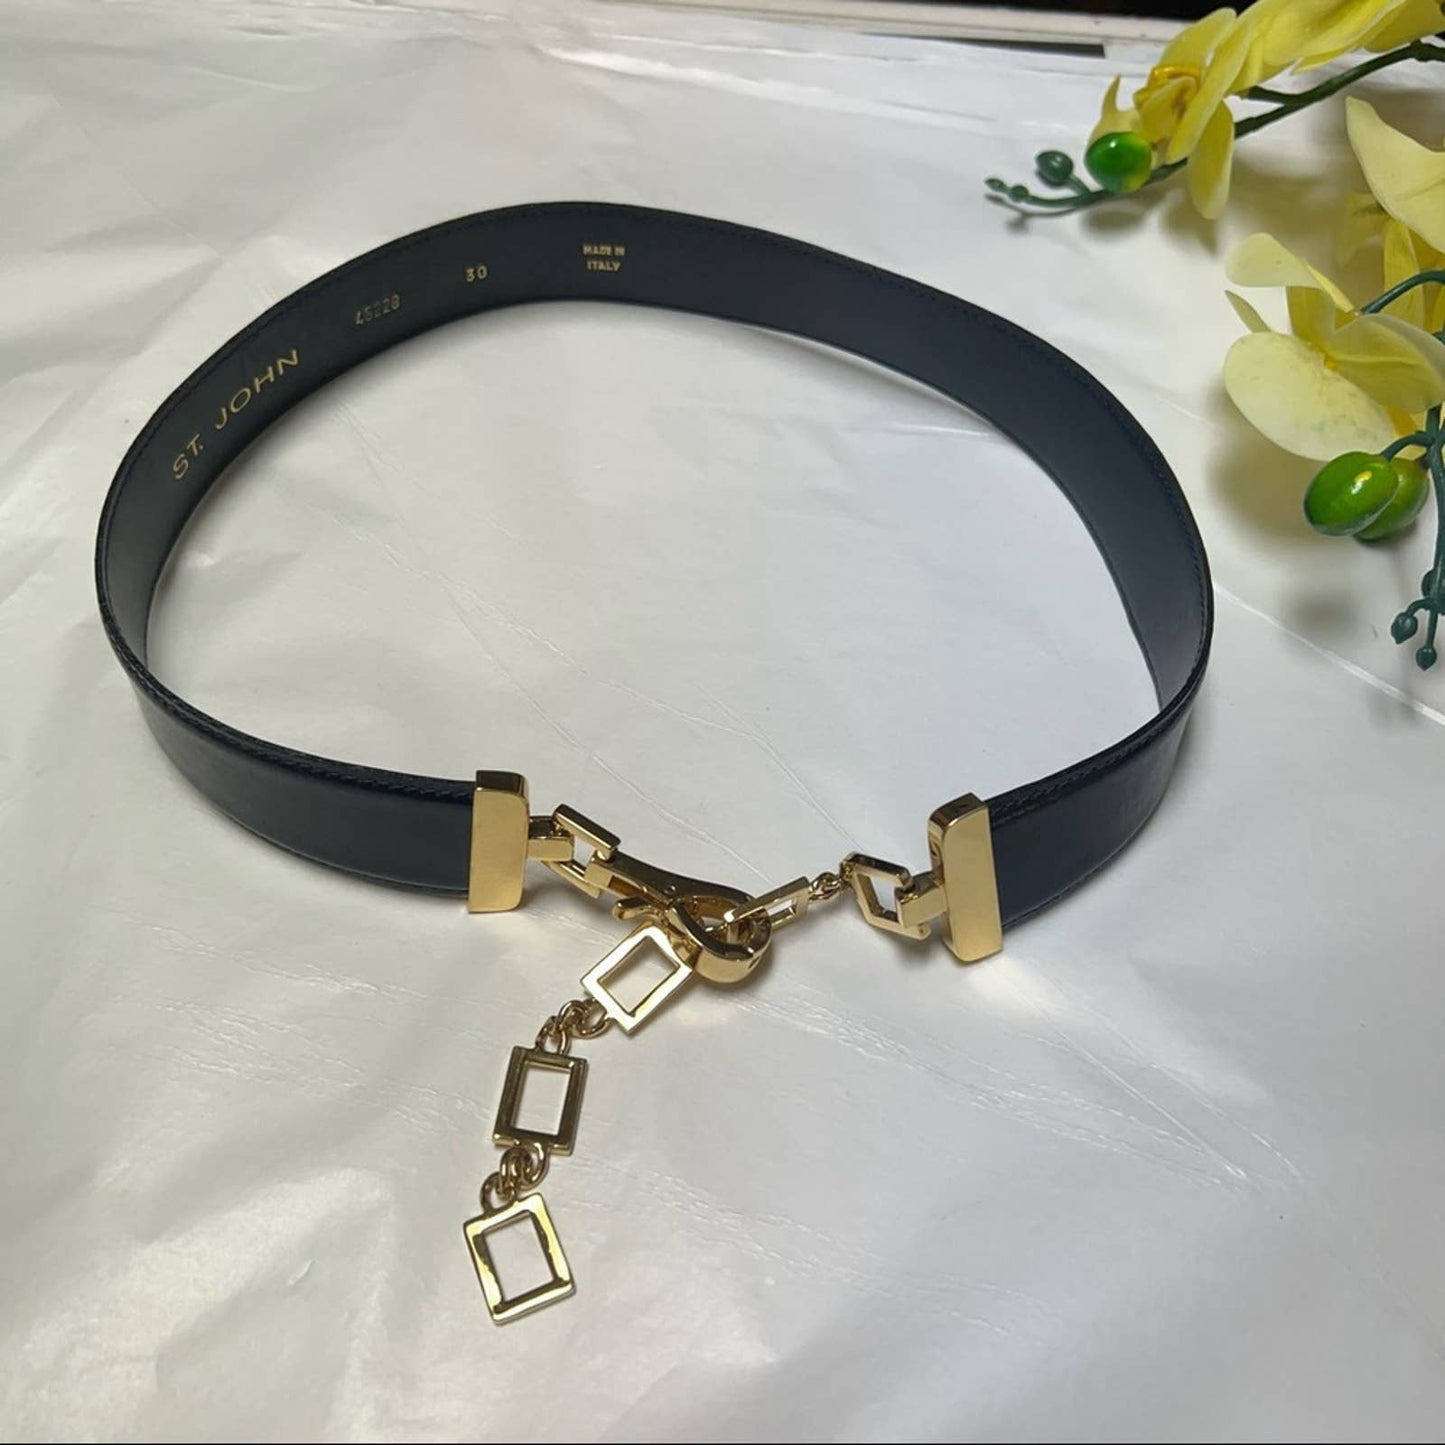 St. John Black Leather Belt with Gold Chain 30